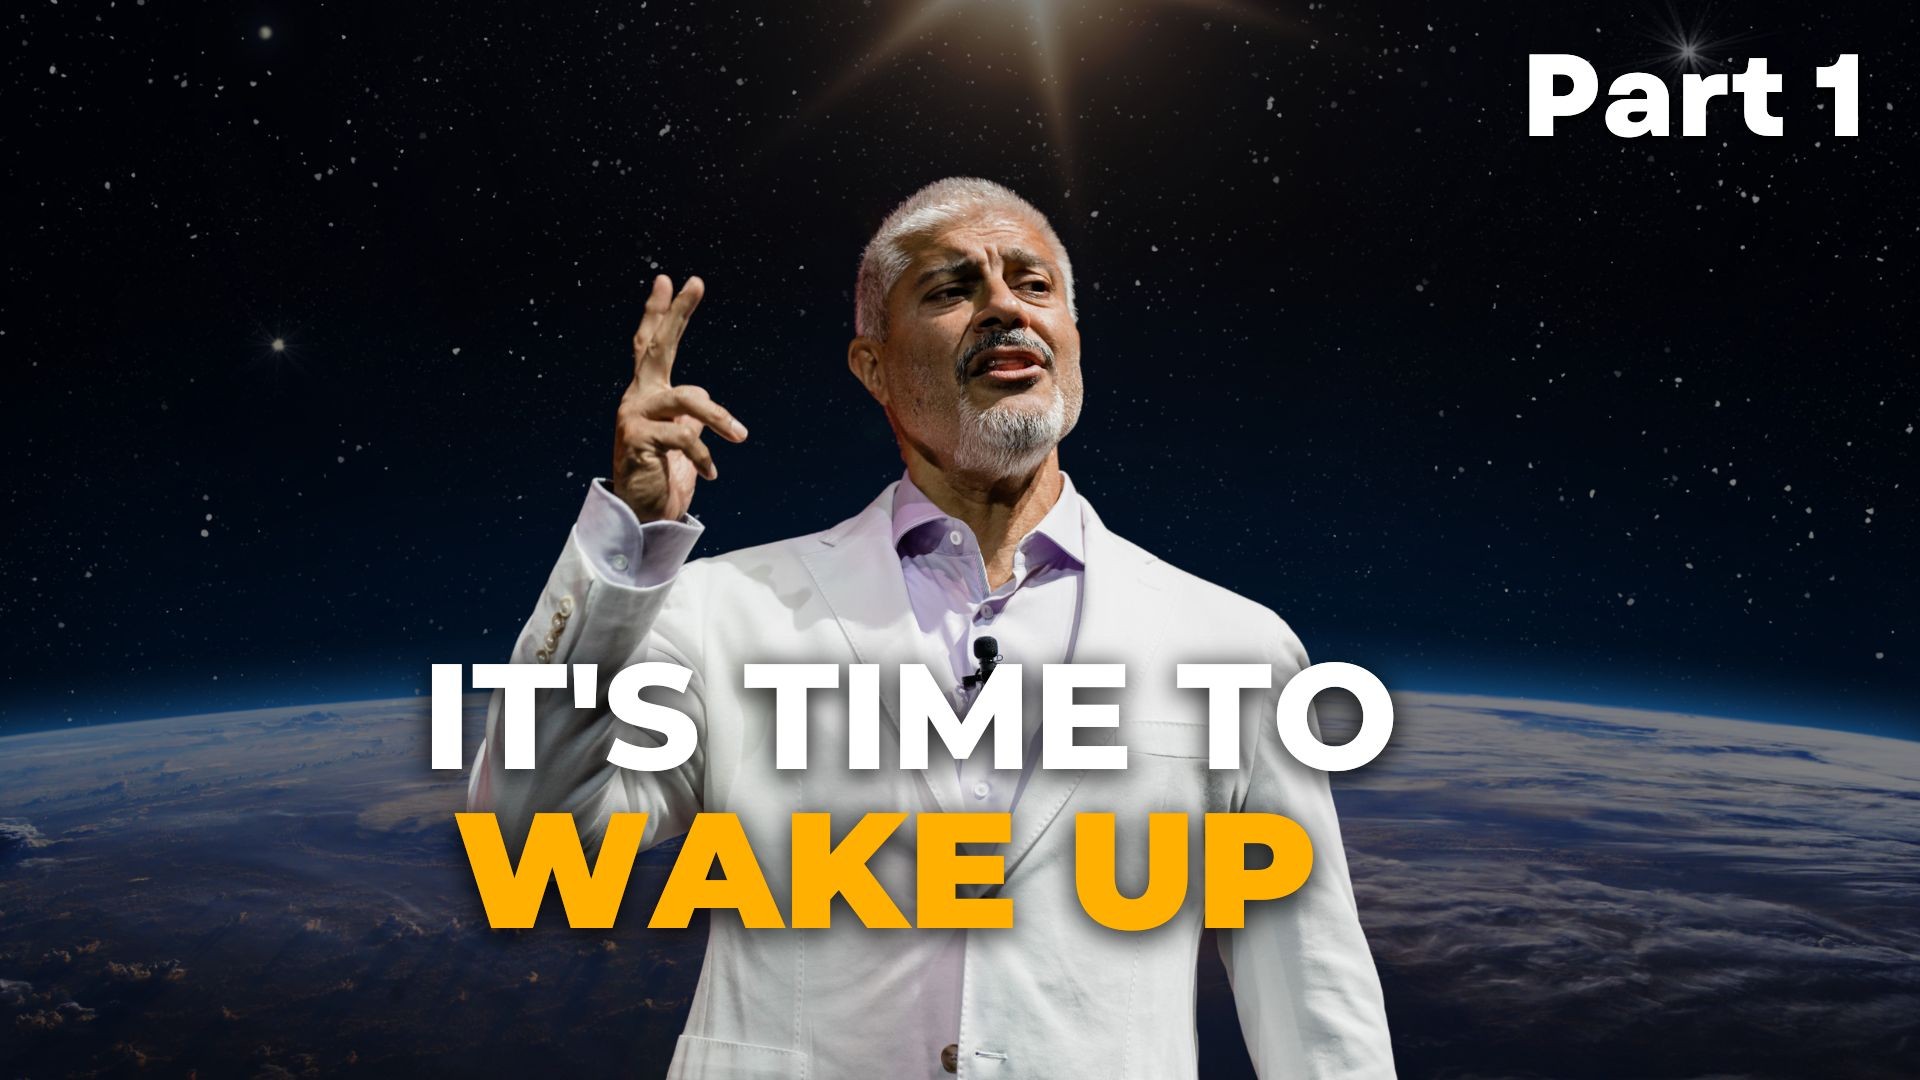 â�£It's Time To Wake up (Part 1 of 4) - Dr Rashid A Buttar